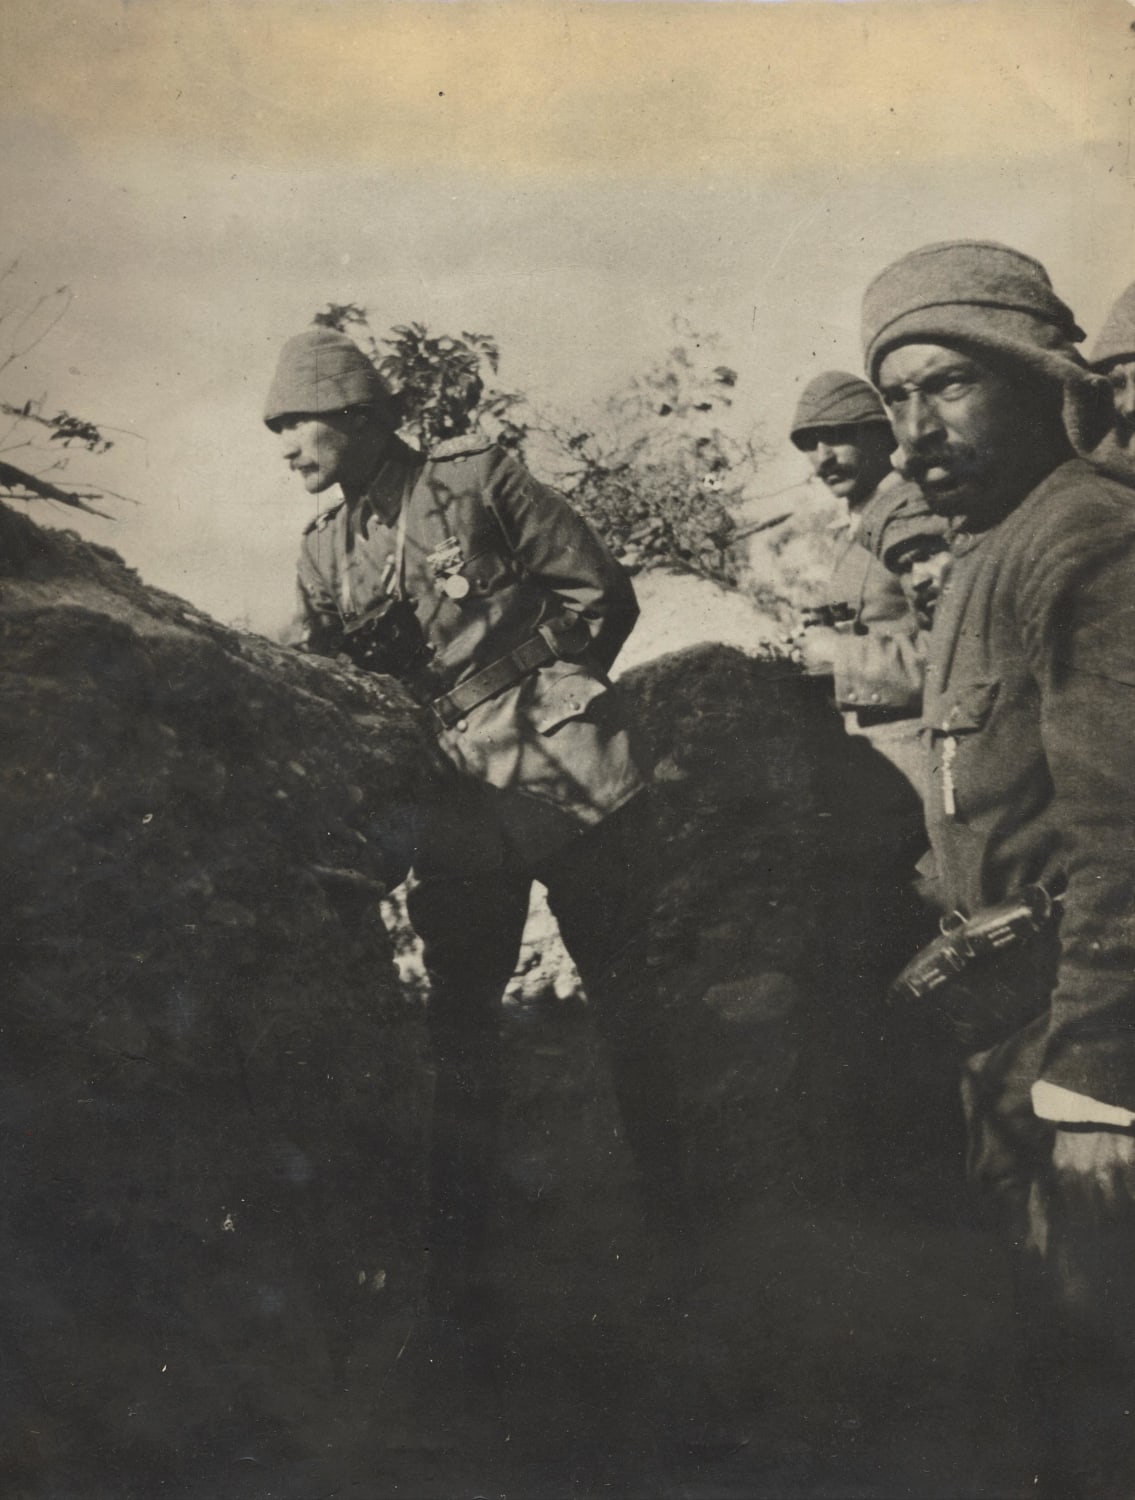 Atatürk in the trench with his soldiers, Çanakkale War - 1915